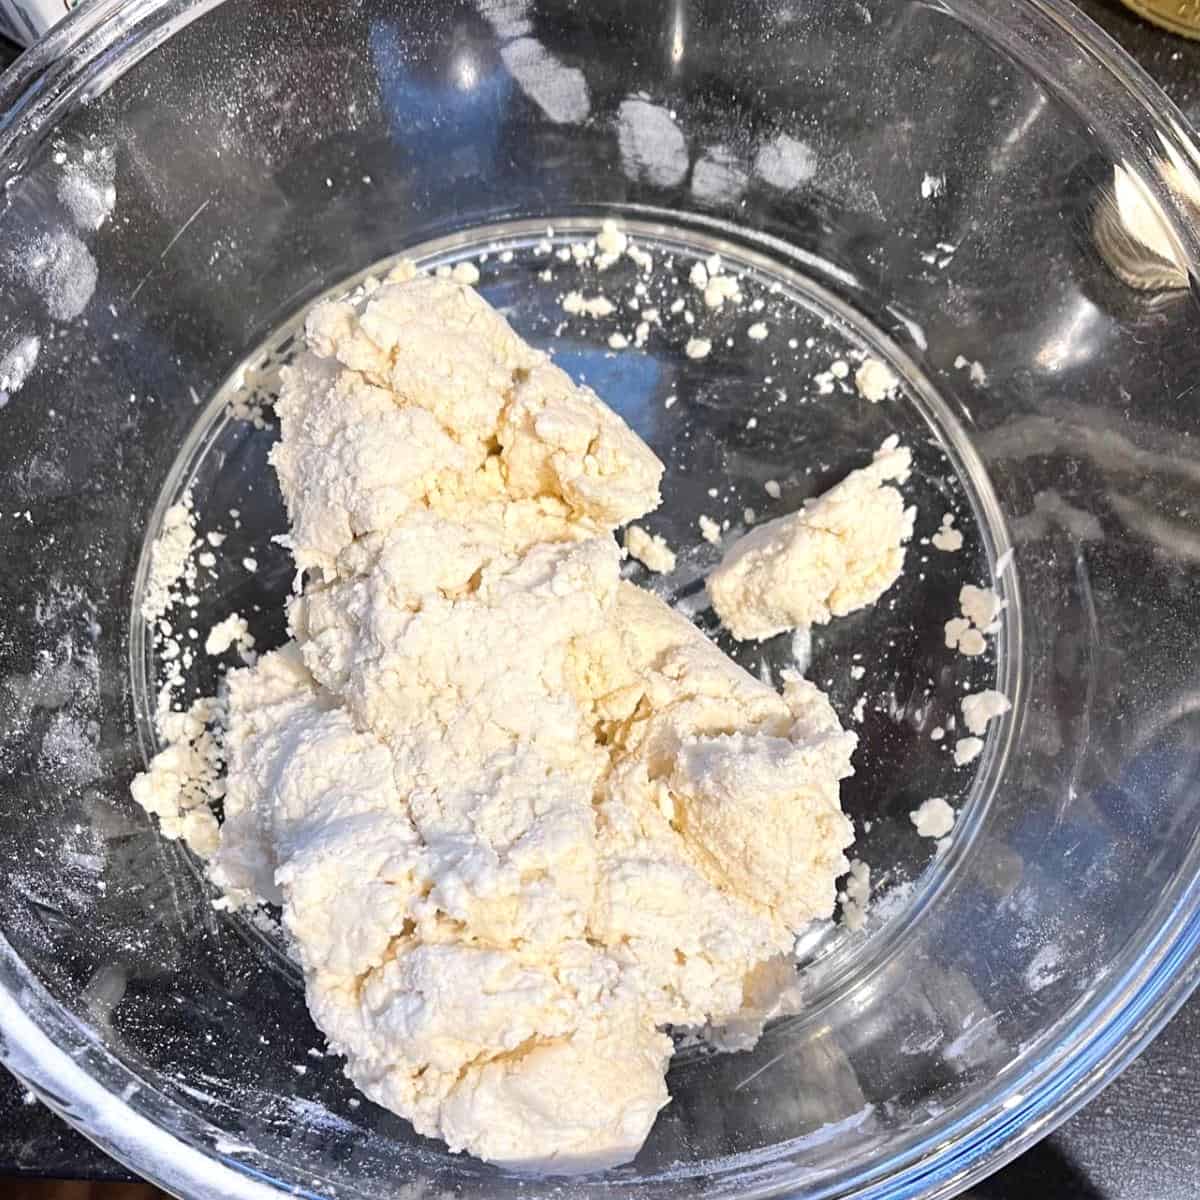 Biscuit dough in bowl.